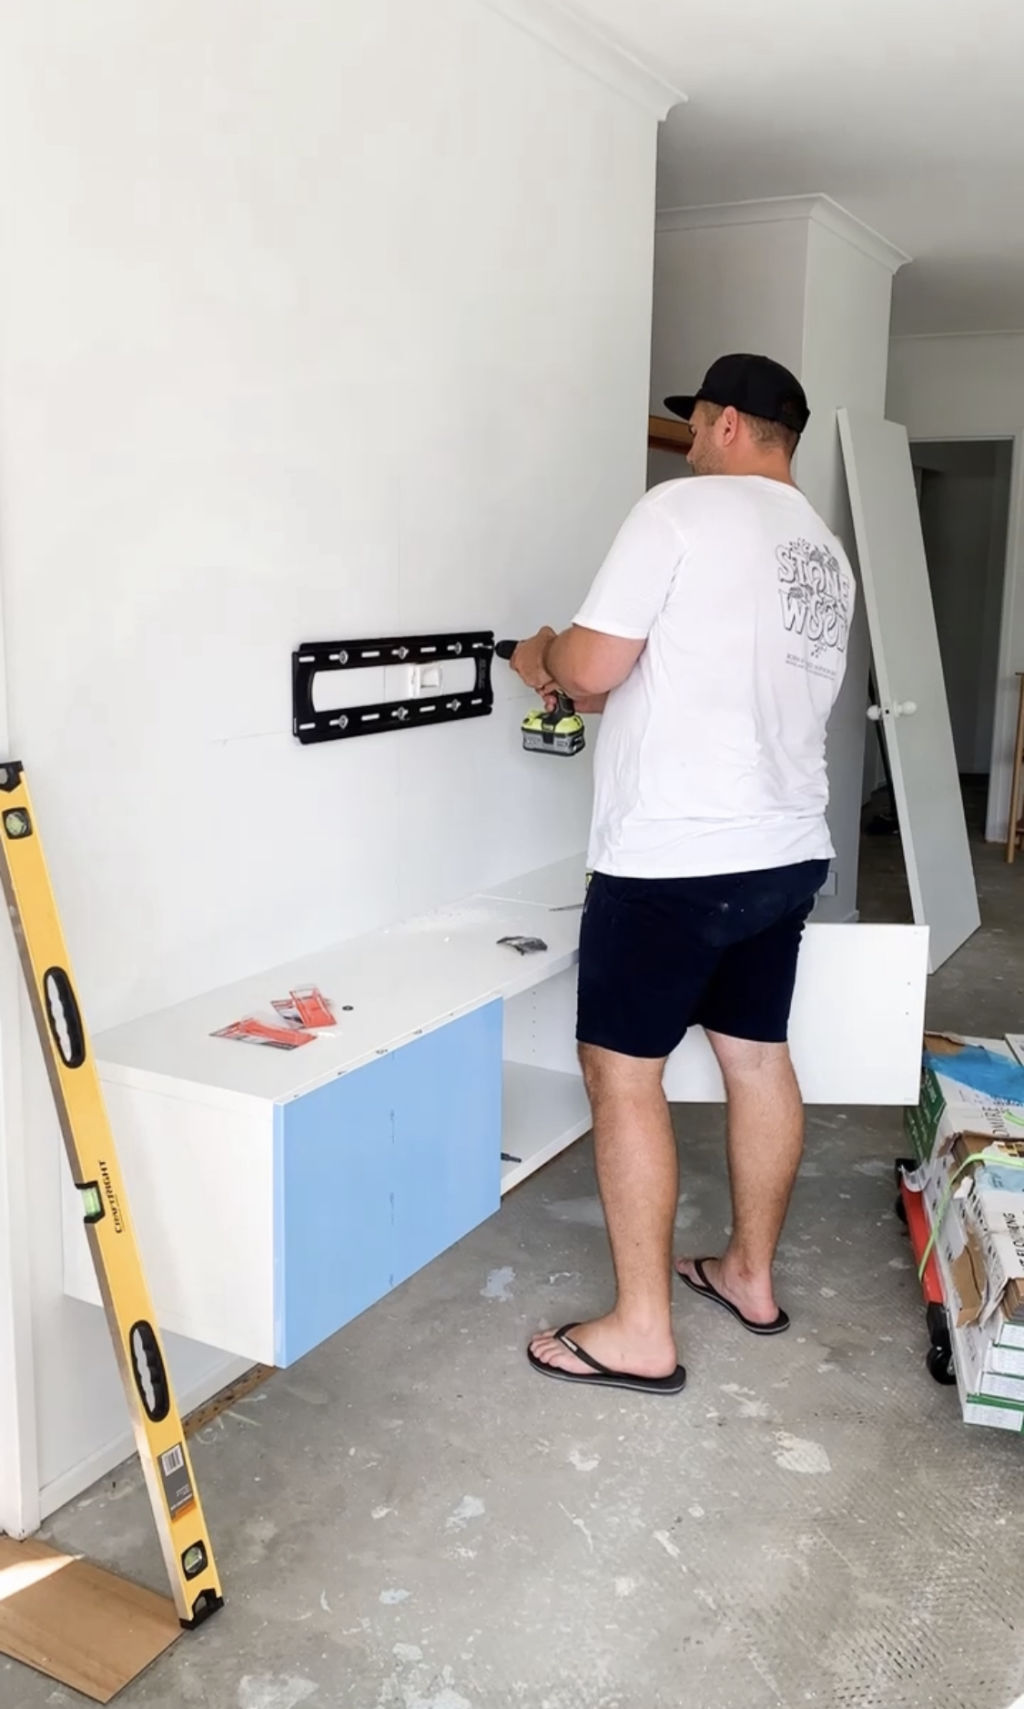 Josh Burkin and Ariana Margetts are renovating their Gold Coast apartment. Photo: Supplied